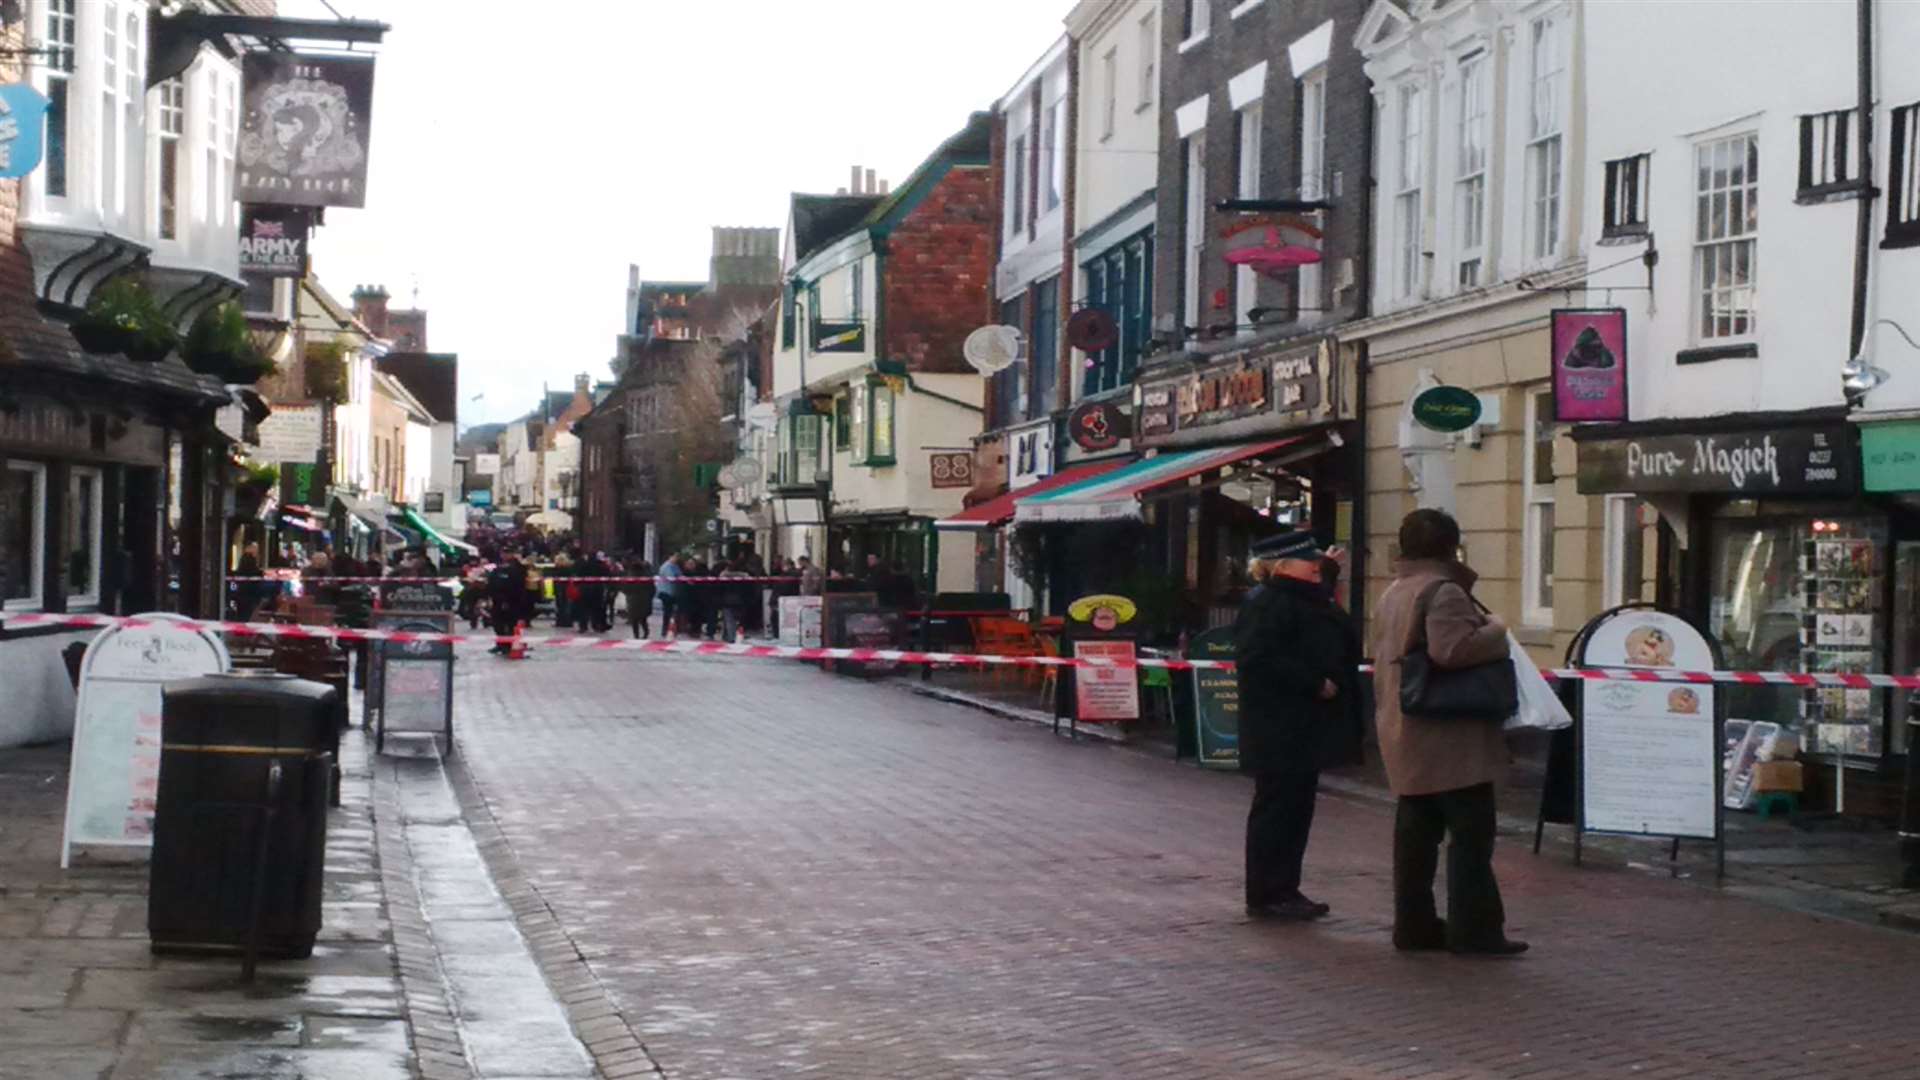 St Peter's Street has been sealed off. Picture: Karol Steele